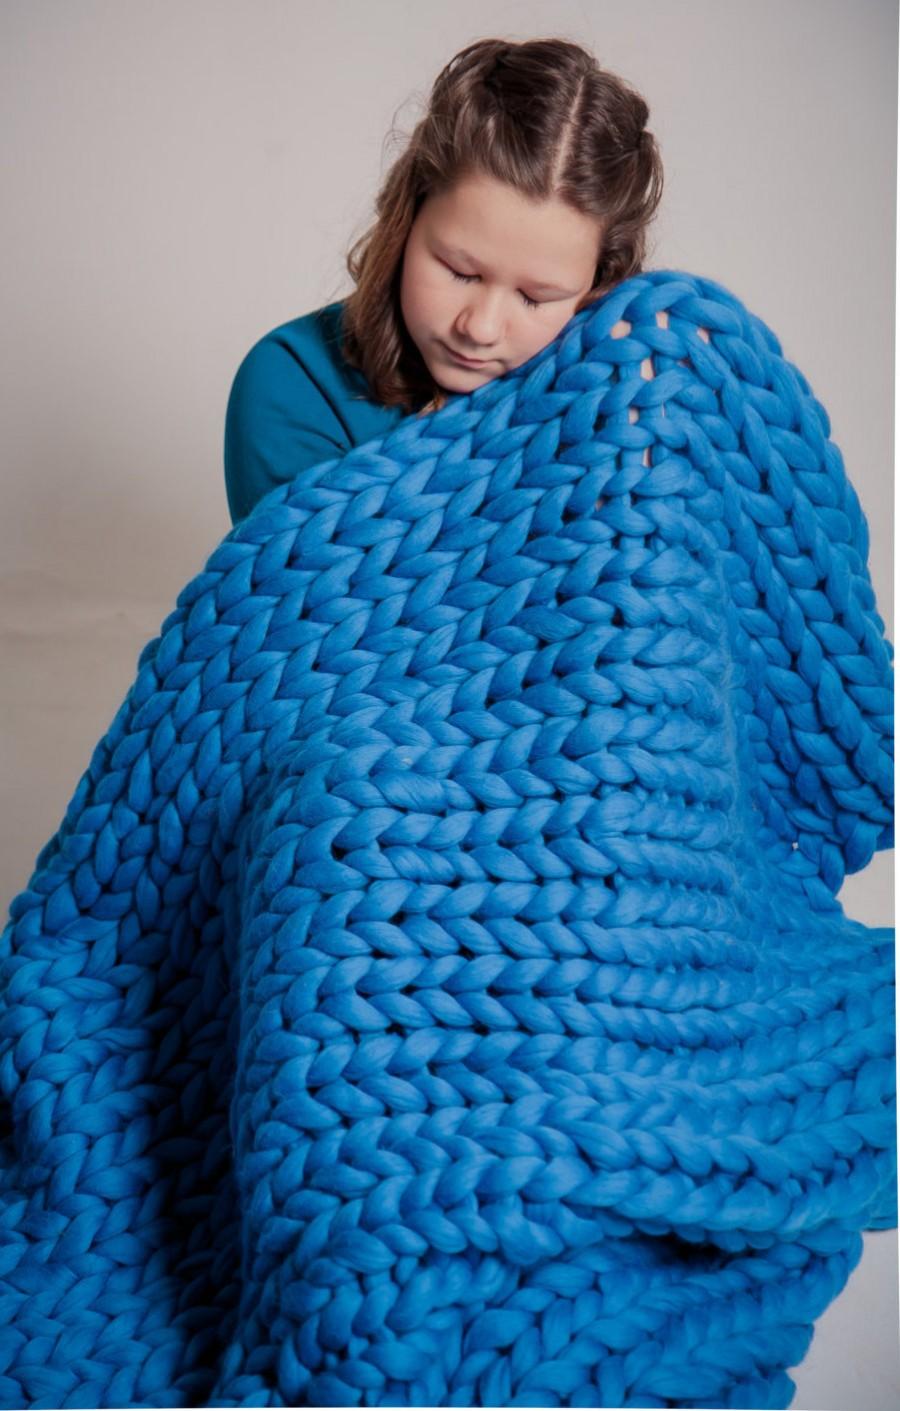 Mariage - Chunky blanket throw, Giant knitted afghan blanket, Pure Wool Giant Blanket, Bulky Knit Throw, Chunky Knitting, Lap blanket. Gift, Blue